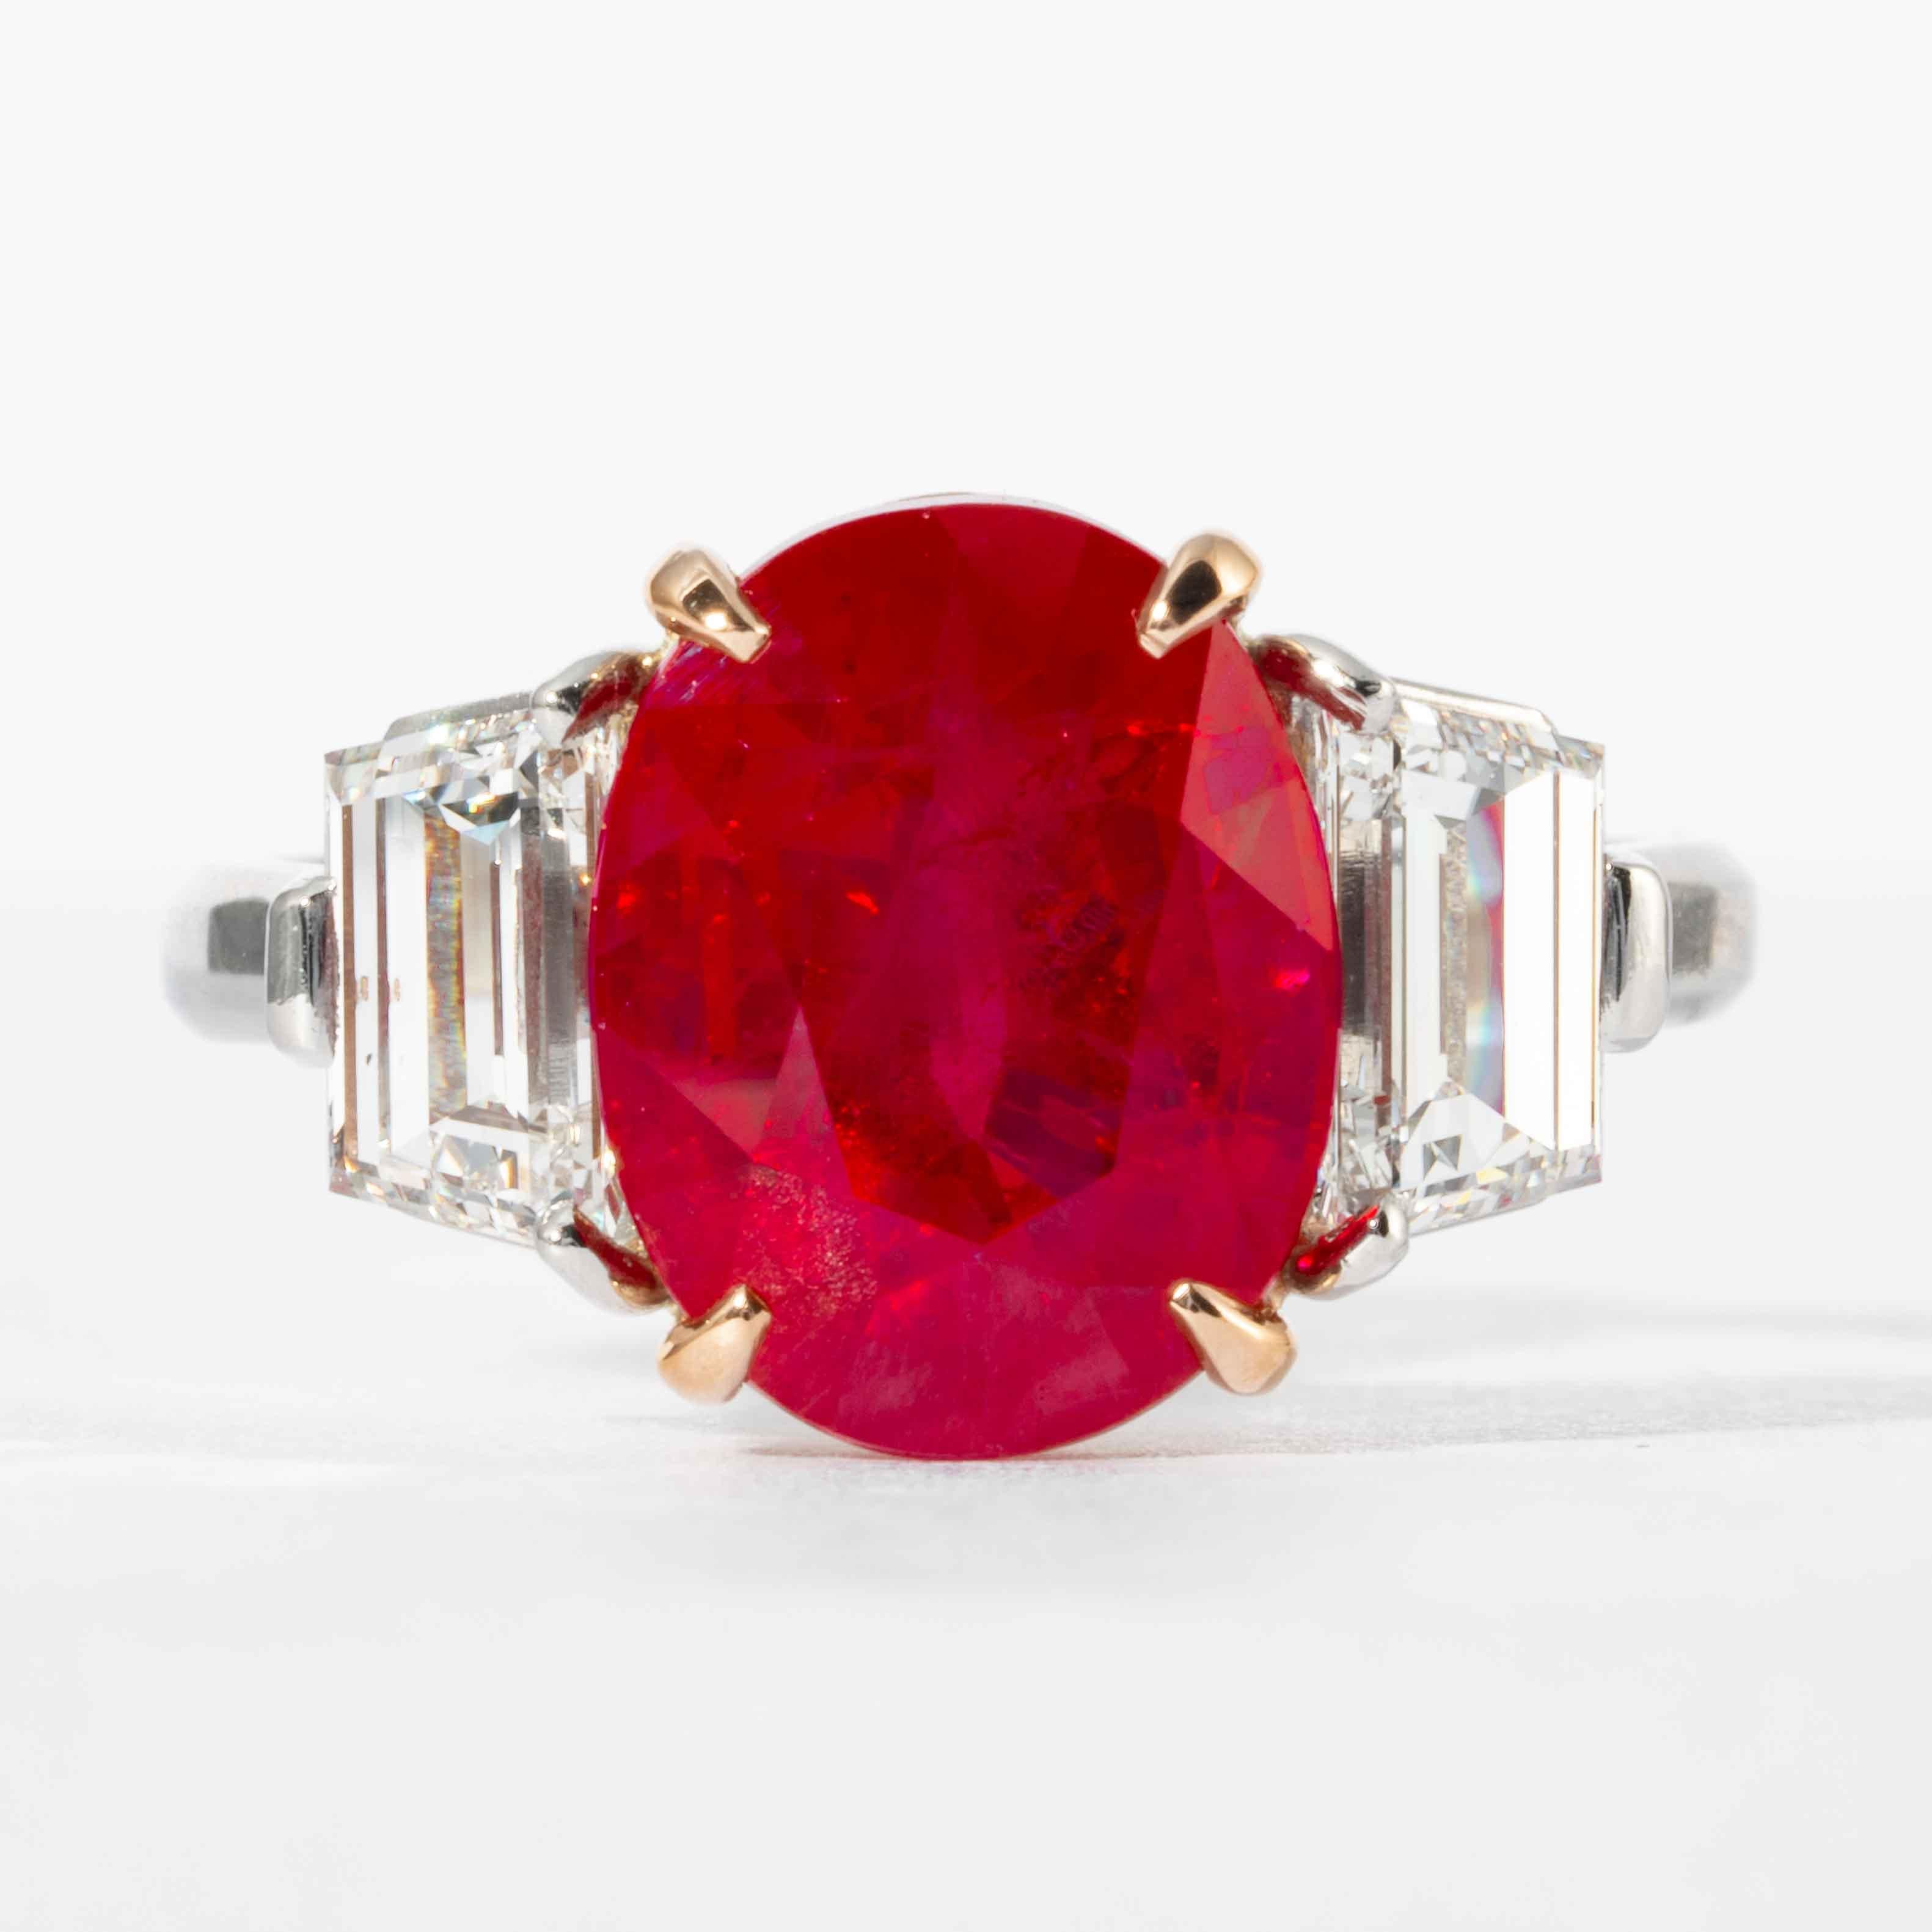 This ruby and diamond 3-stone ring is offered by Shreve, Crump & Low.  Platinum custom made 3-stone ring consisting of one oval cut Burma ruby weighing 5.45 carats with AGL certificate No. CS44053, the center stone is flanked by 2 step cut trapezoid